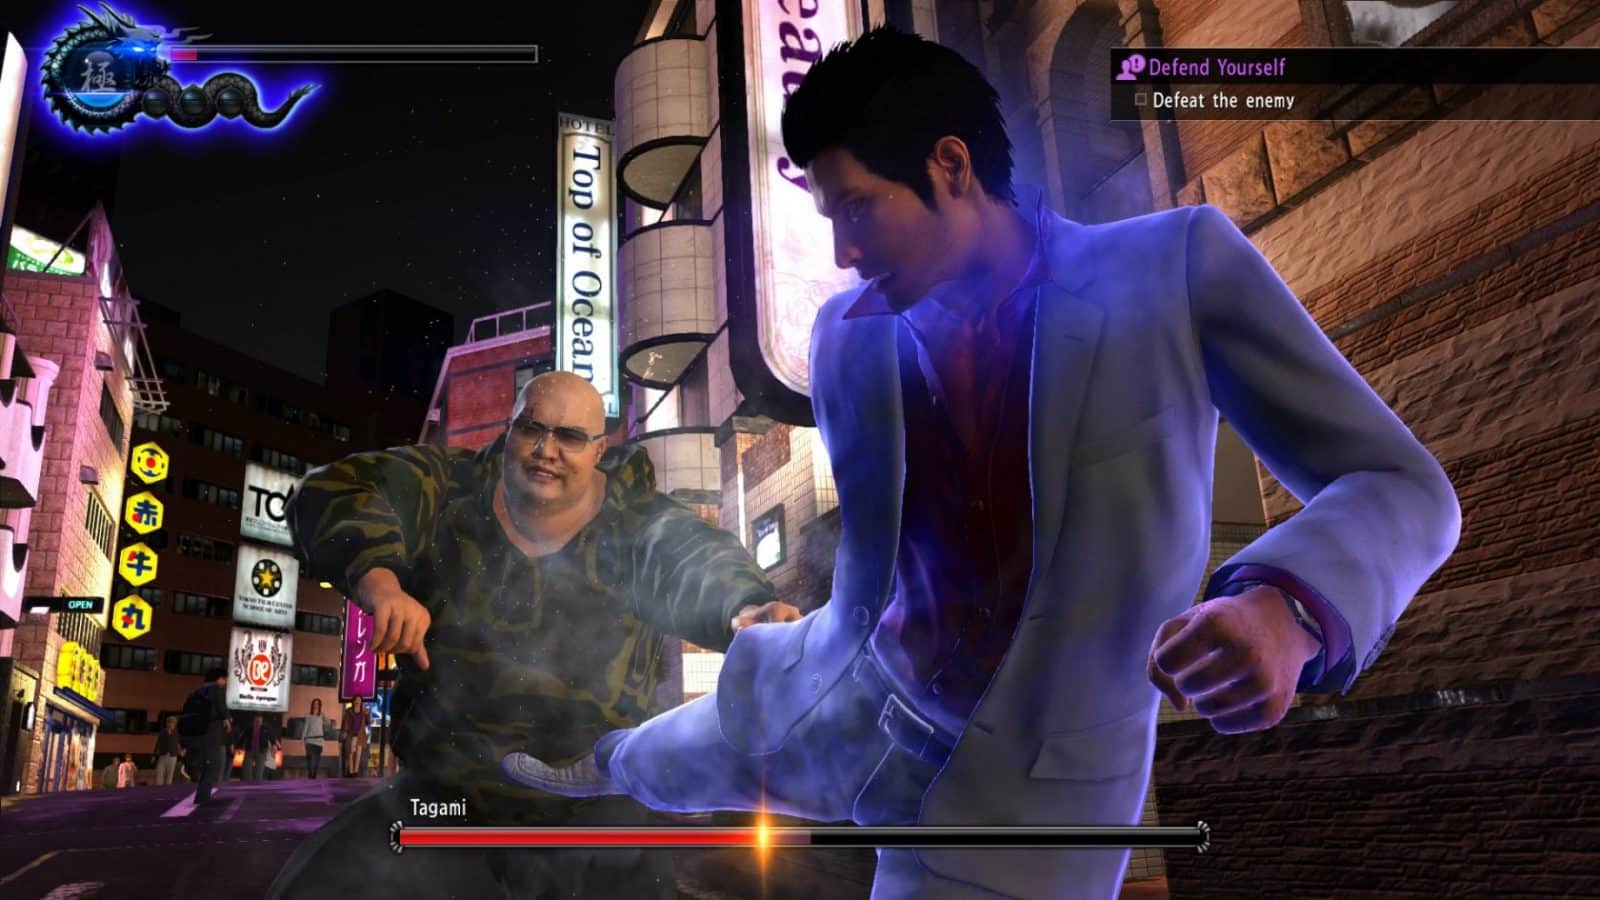 YAKUZA 6: THE SONG OF LIFE - Kloppe, Kloppe, Fighter!